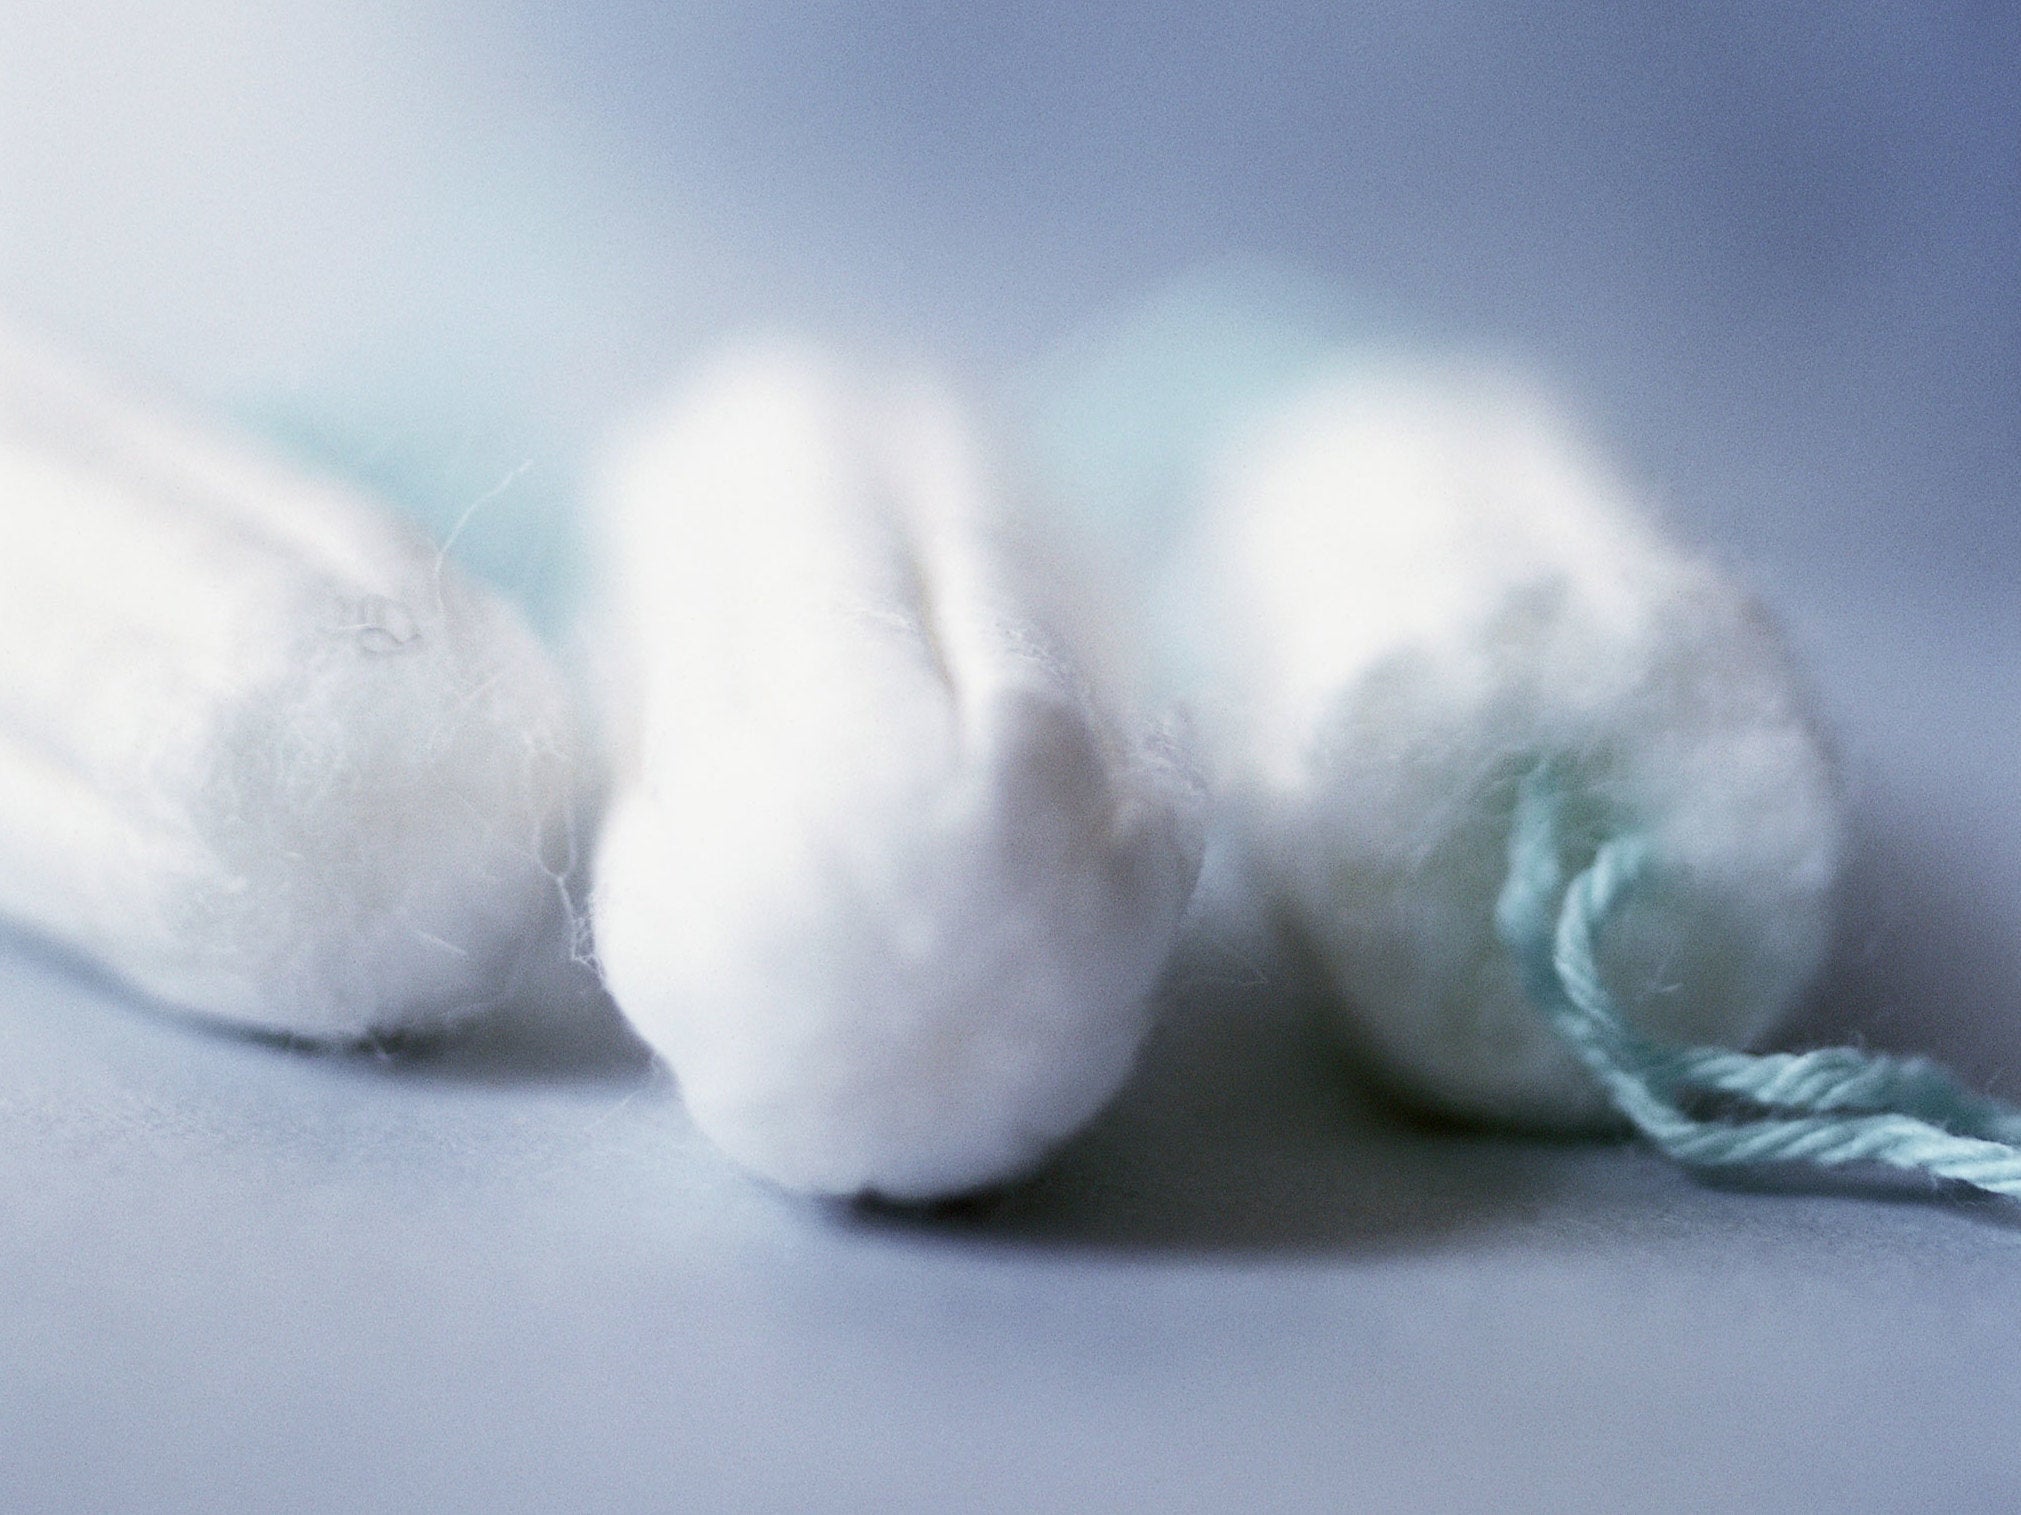 Those who struggled to afford sanitary products are less likely to have completed their GCSEs